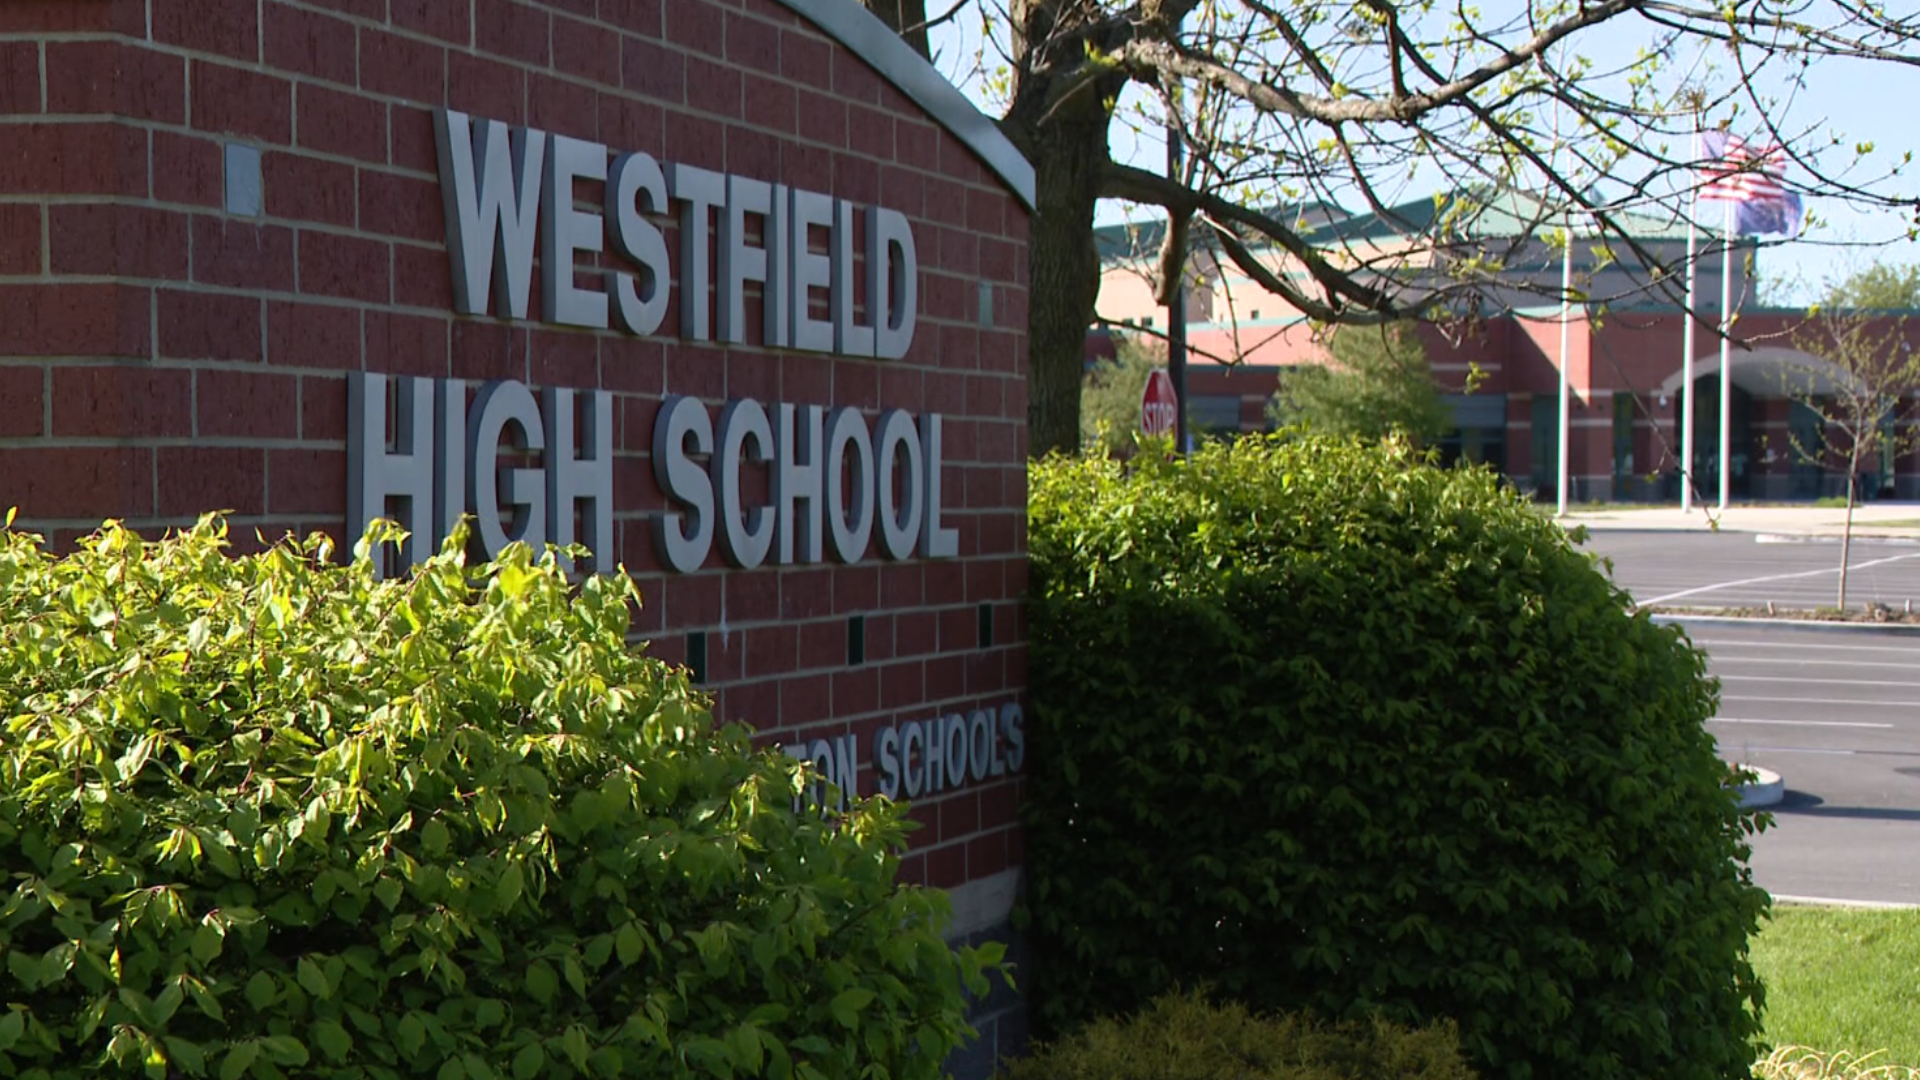 Westfield Washington Schools is reintroducing its mask mandate after a rise in COVID-19 positivity rates across the district.